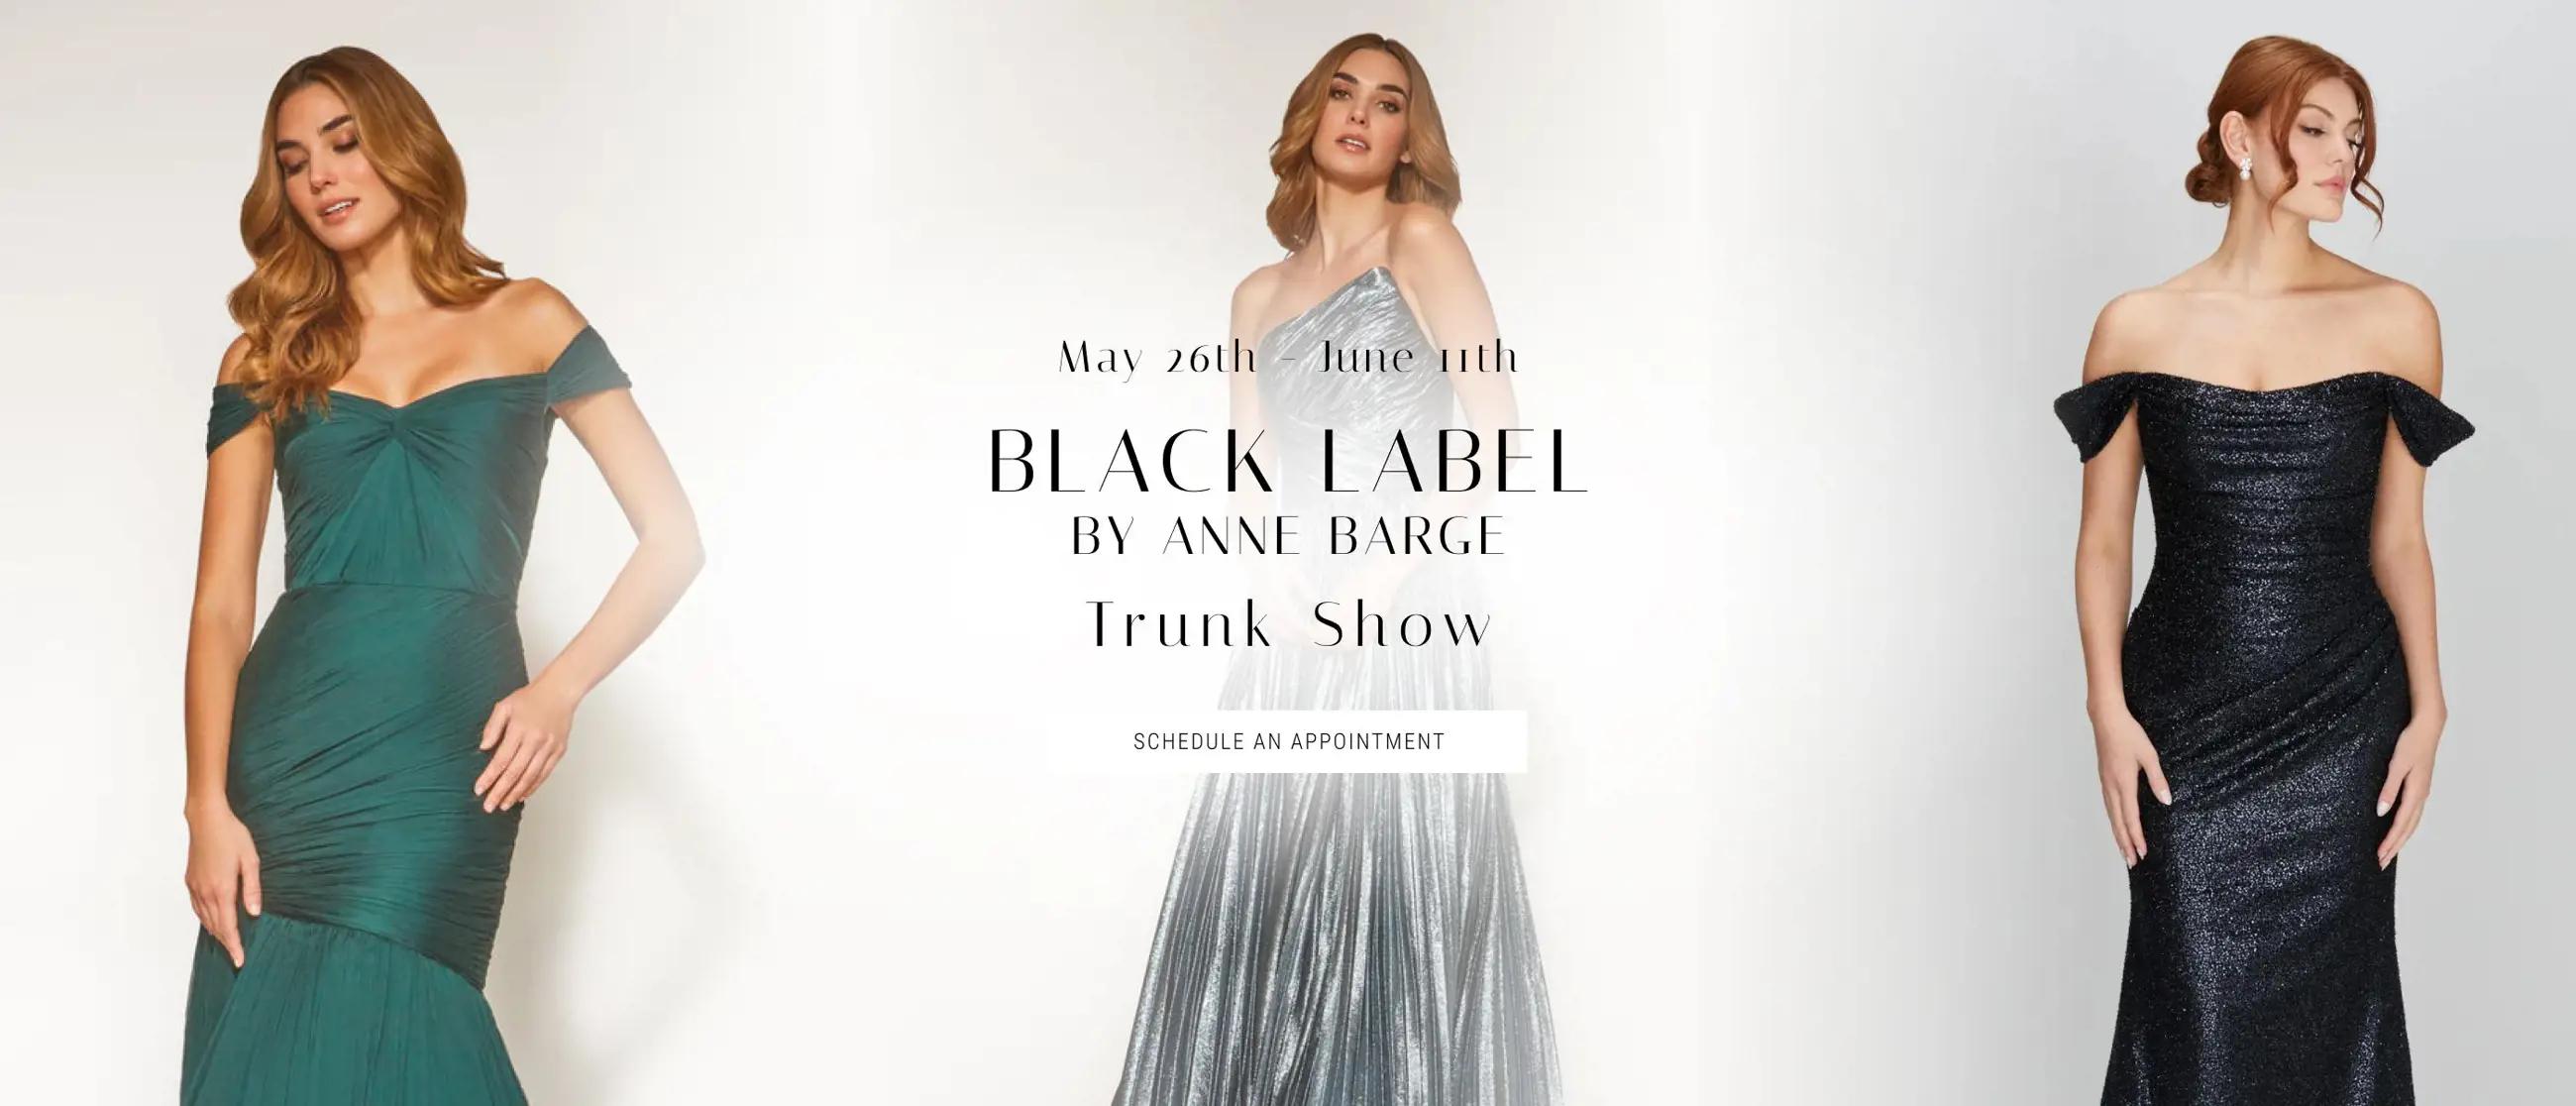 Black Label by Anne Barge Trunk Show Banner